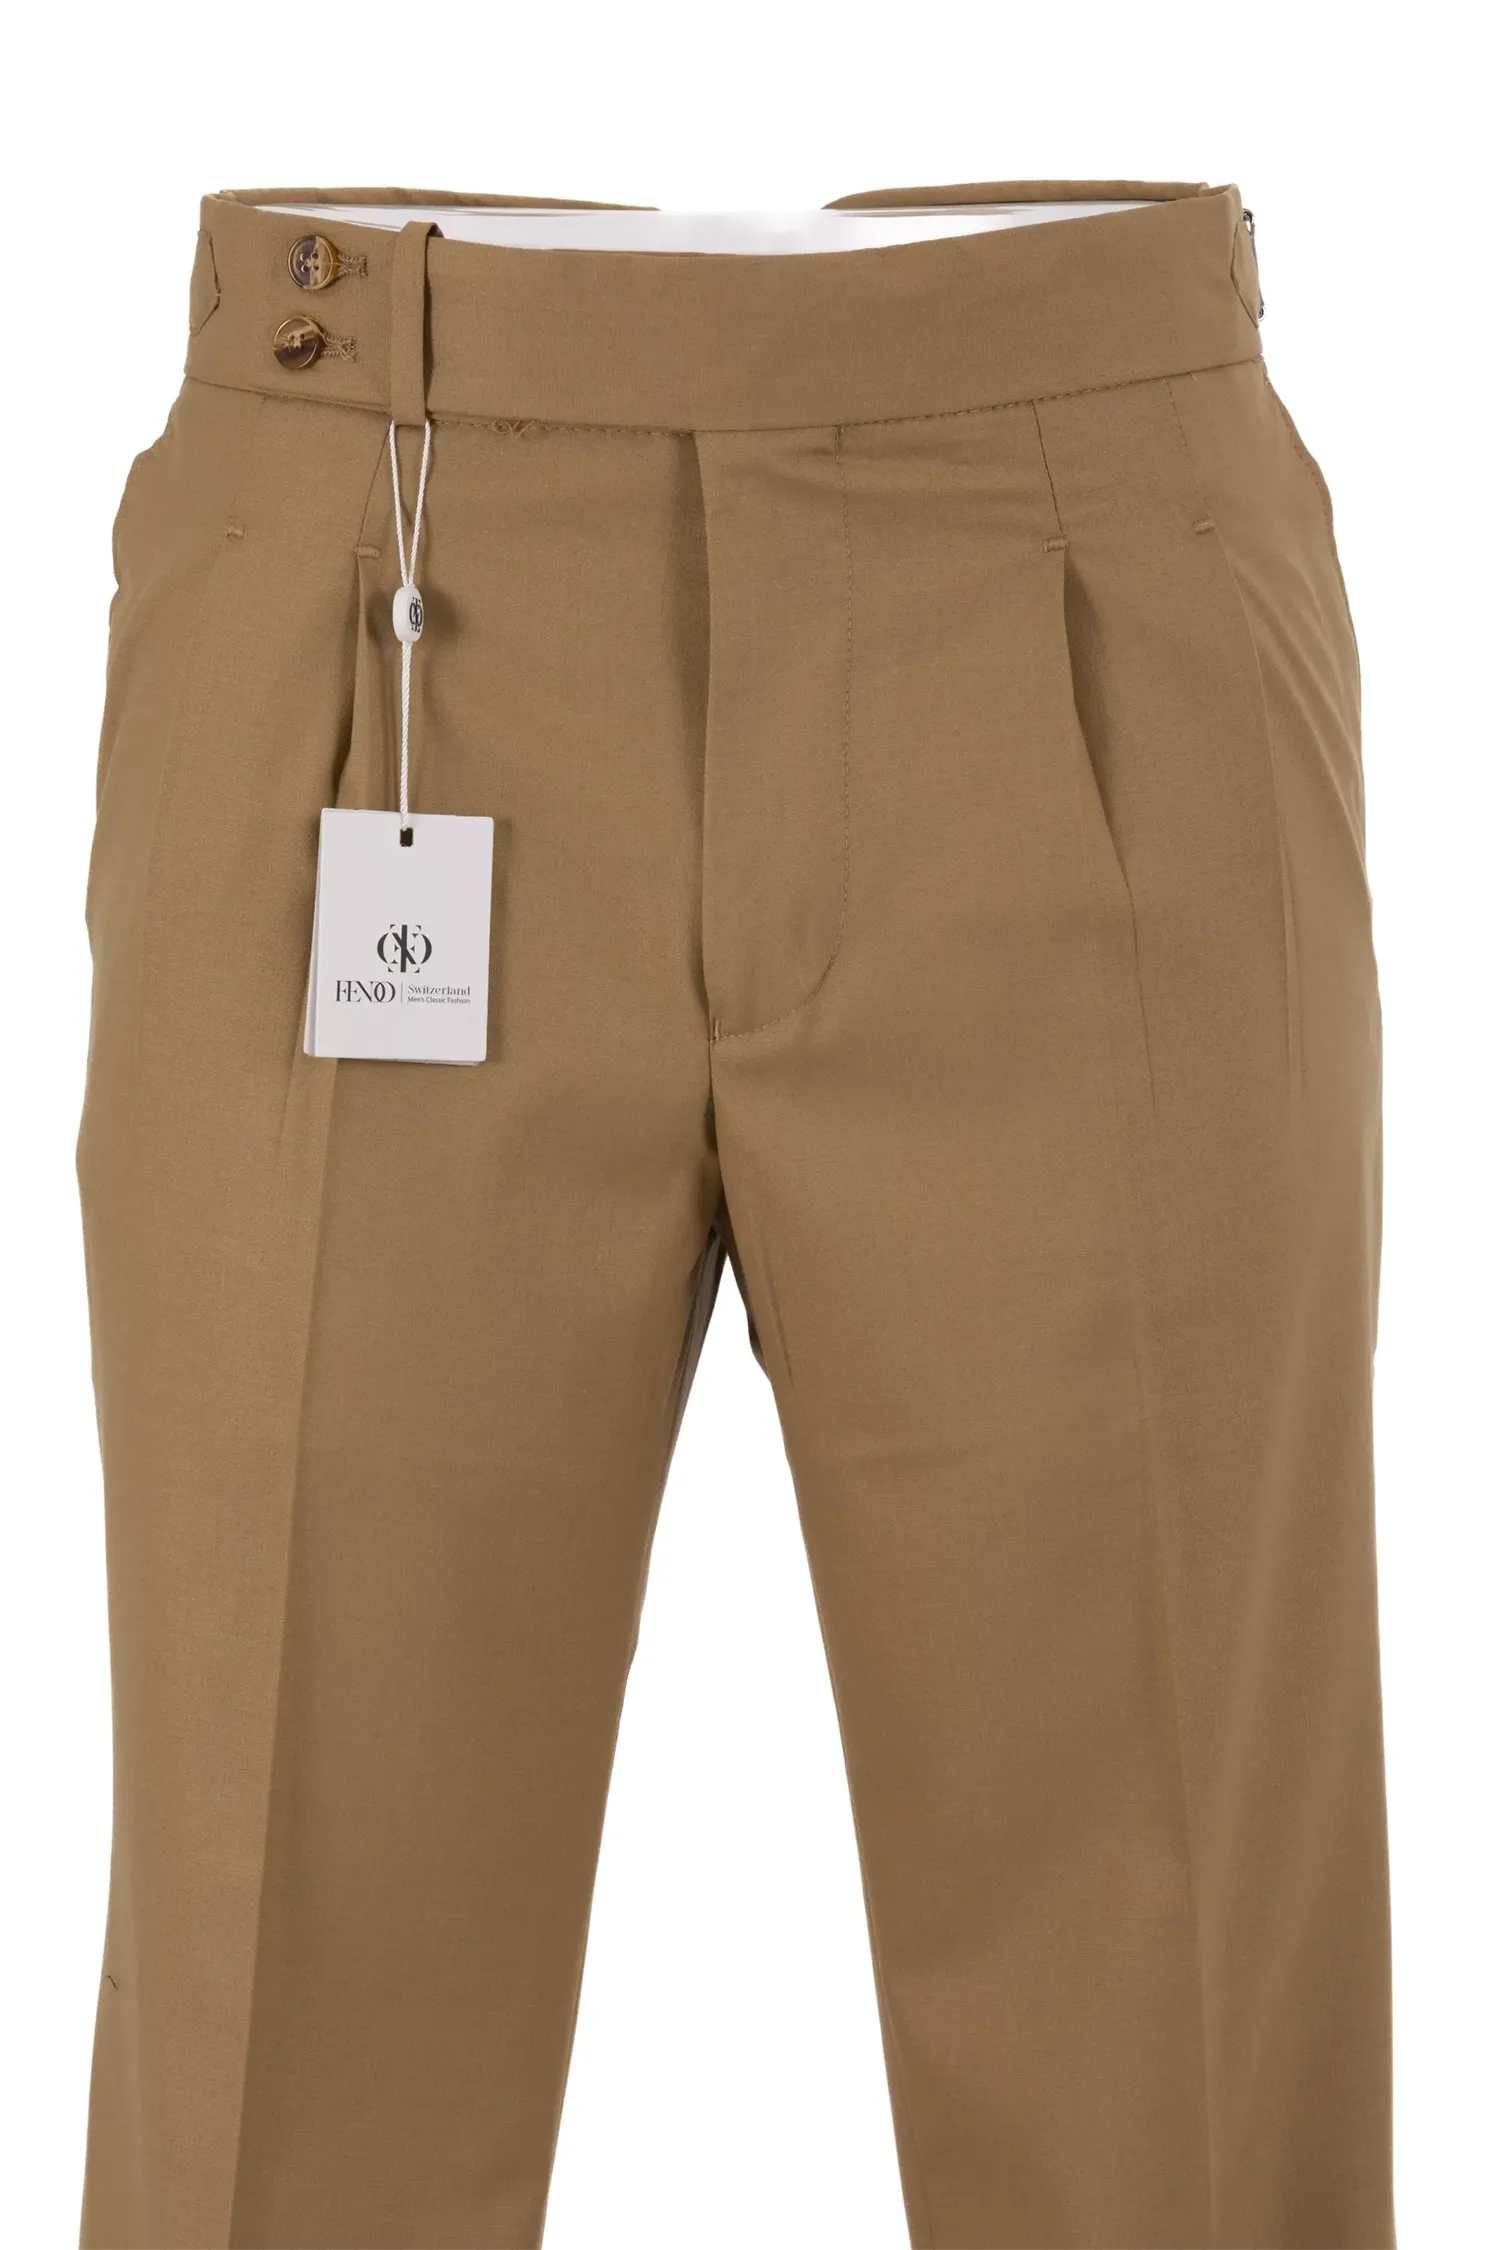 NAPLES Light Brown Italian Style Trousers